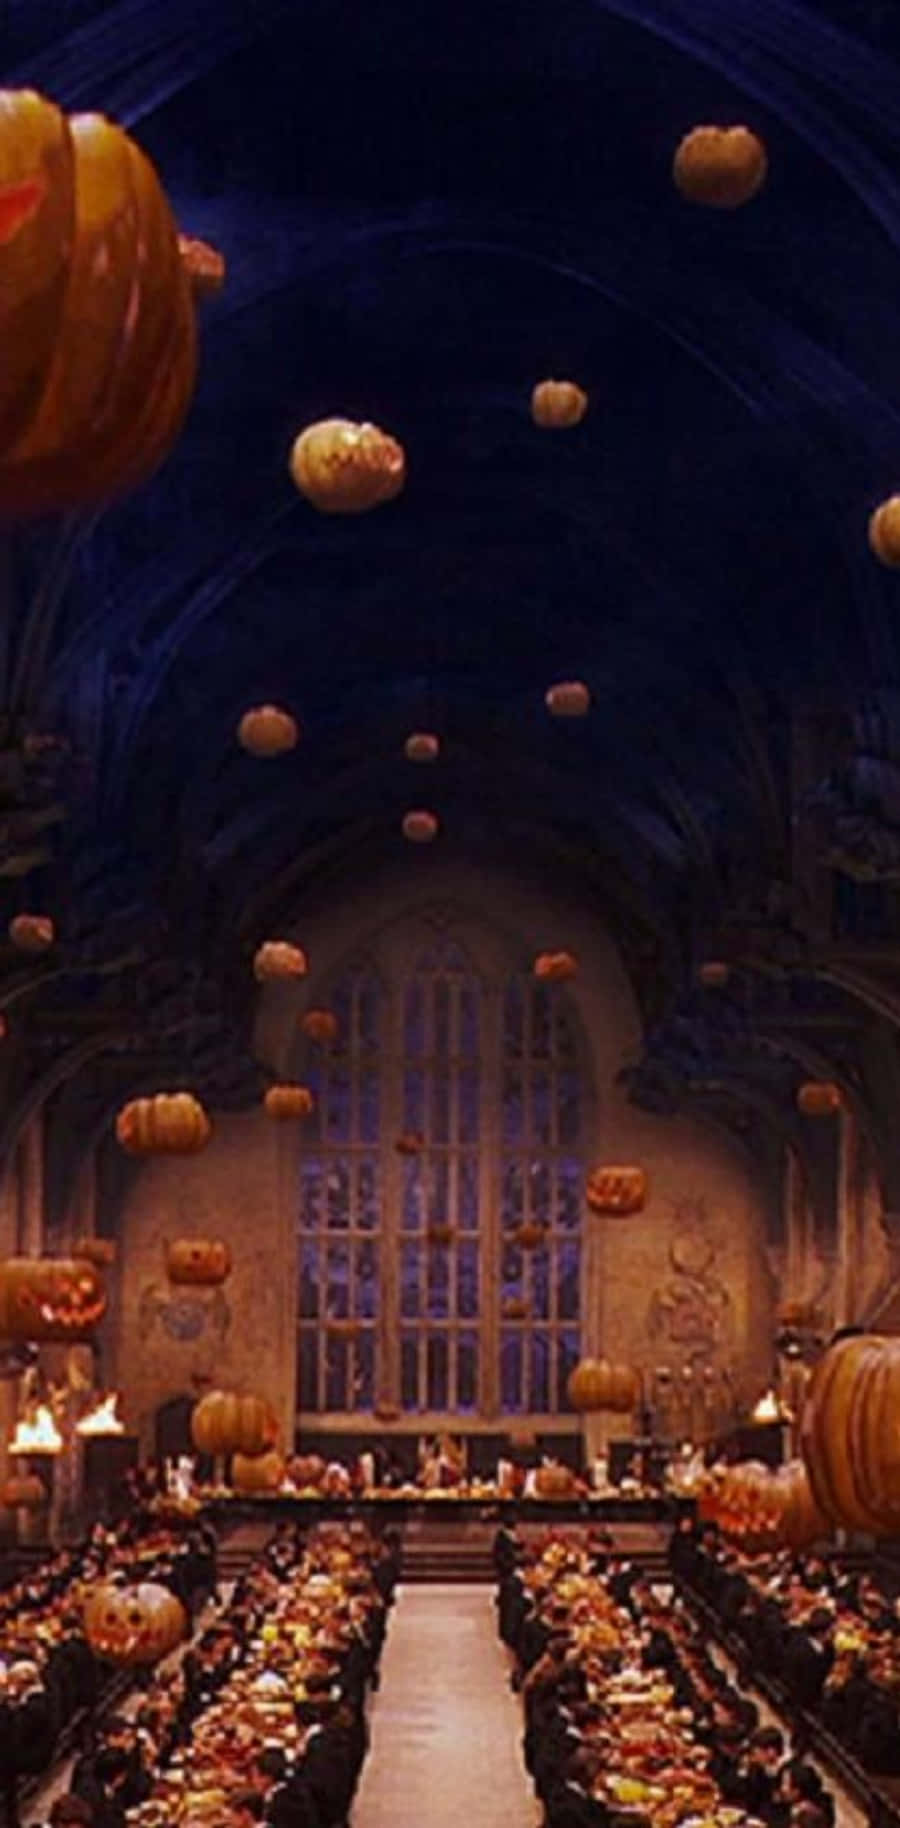 Hogwarts Great Hall, the iconic and stunning center of Hogwarts Castle Wallpaper